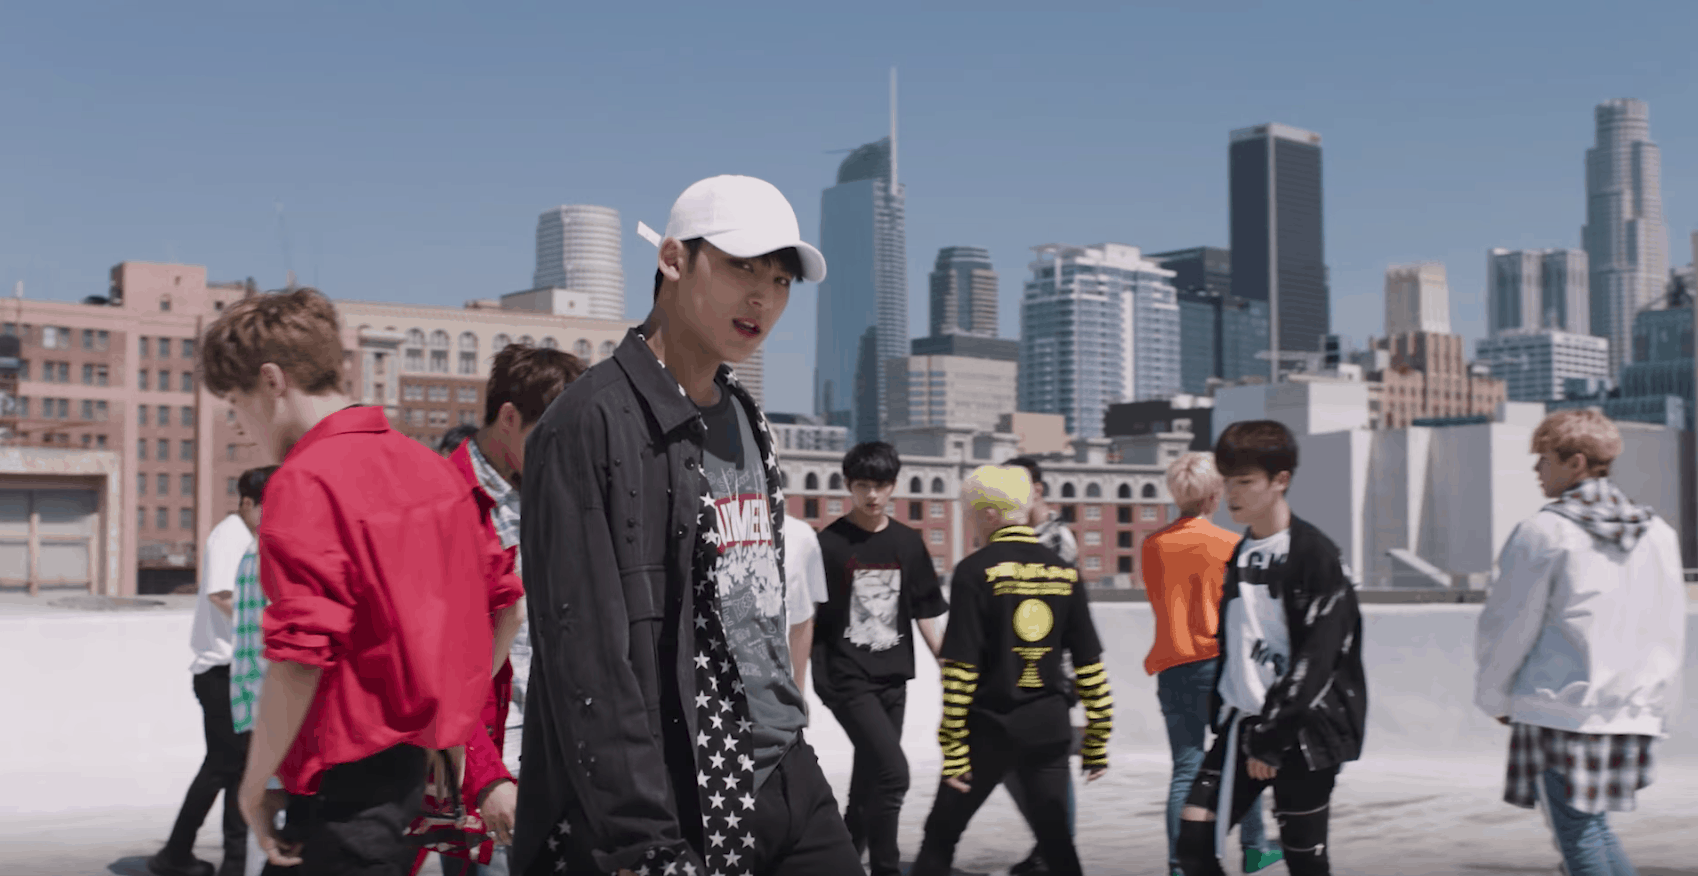 Seventeen kpop fashion: Member wearing a white baseball hat, graphic tee shirt, patterned button-down and gray jacket